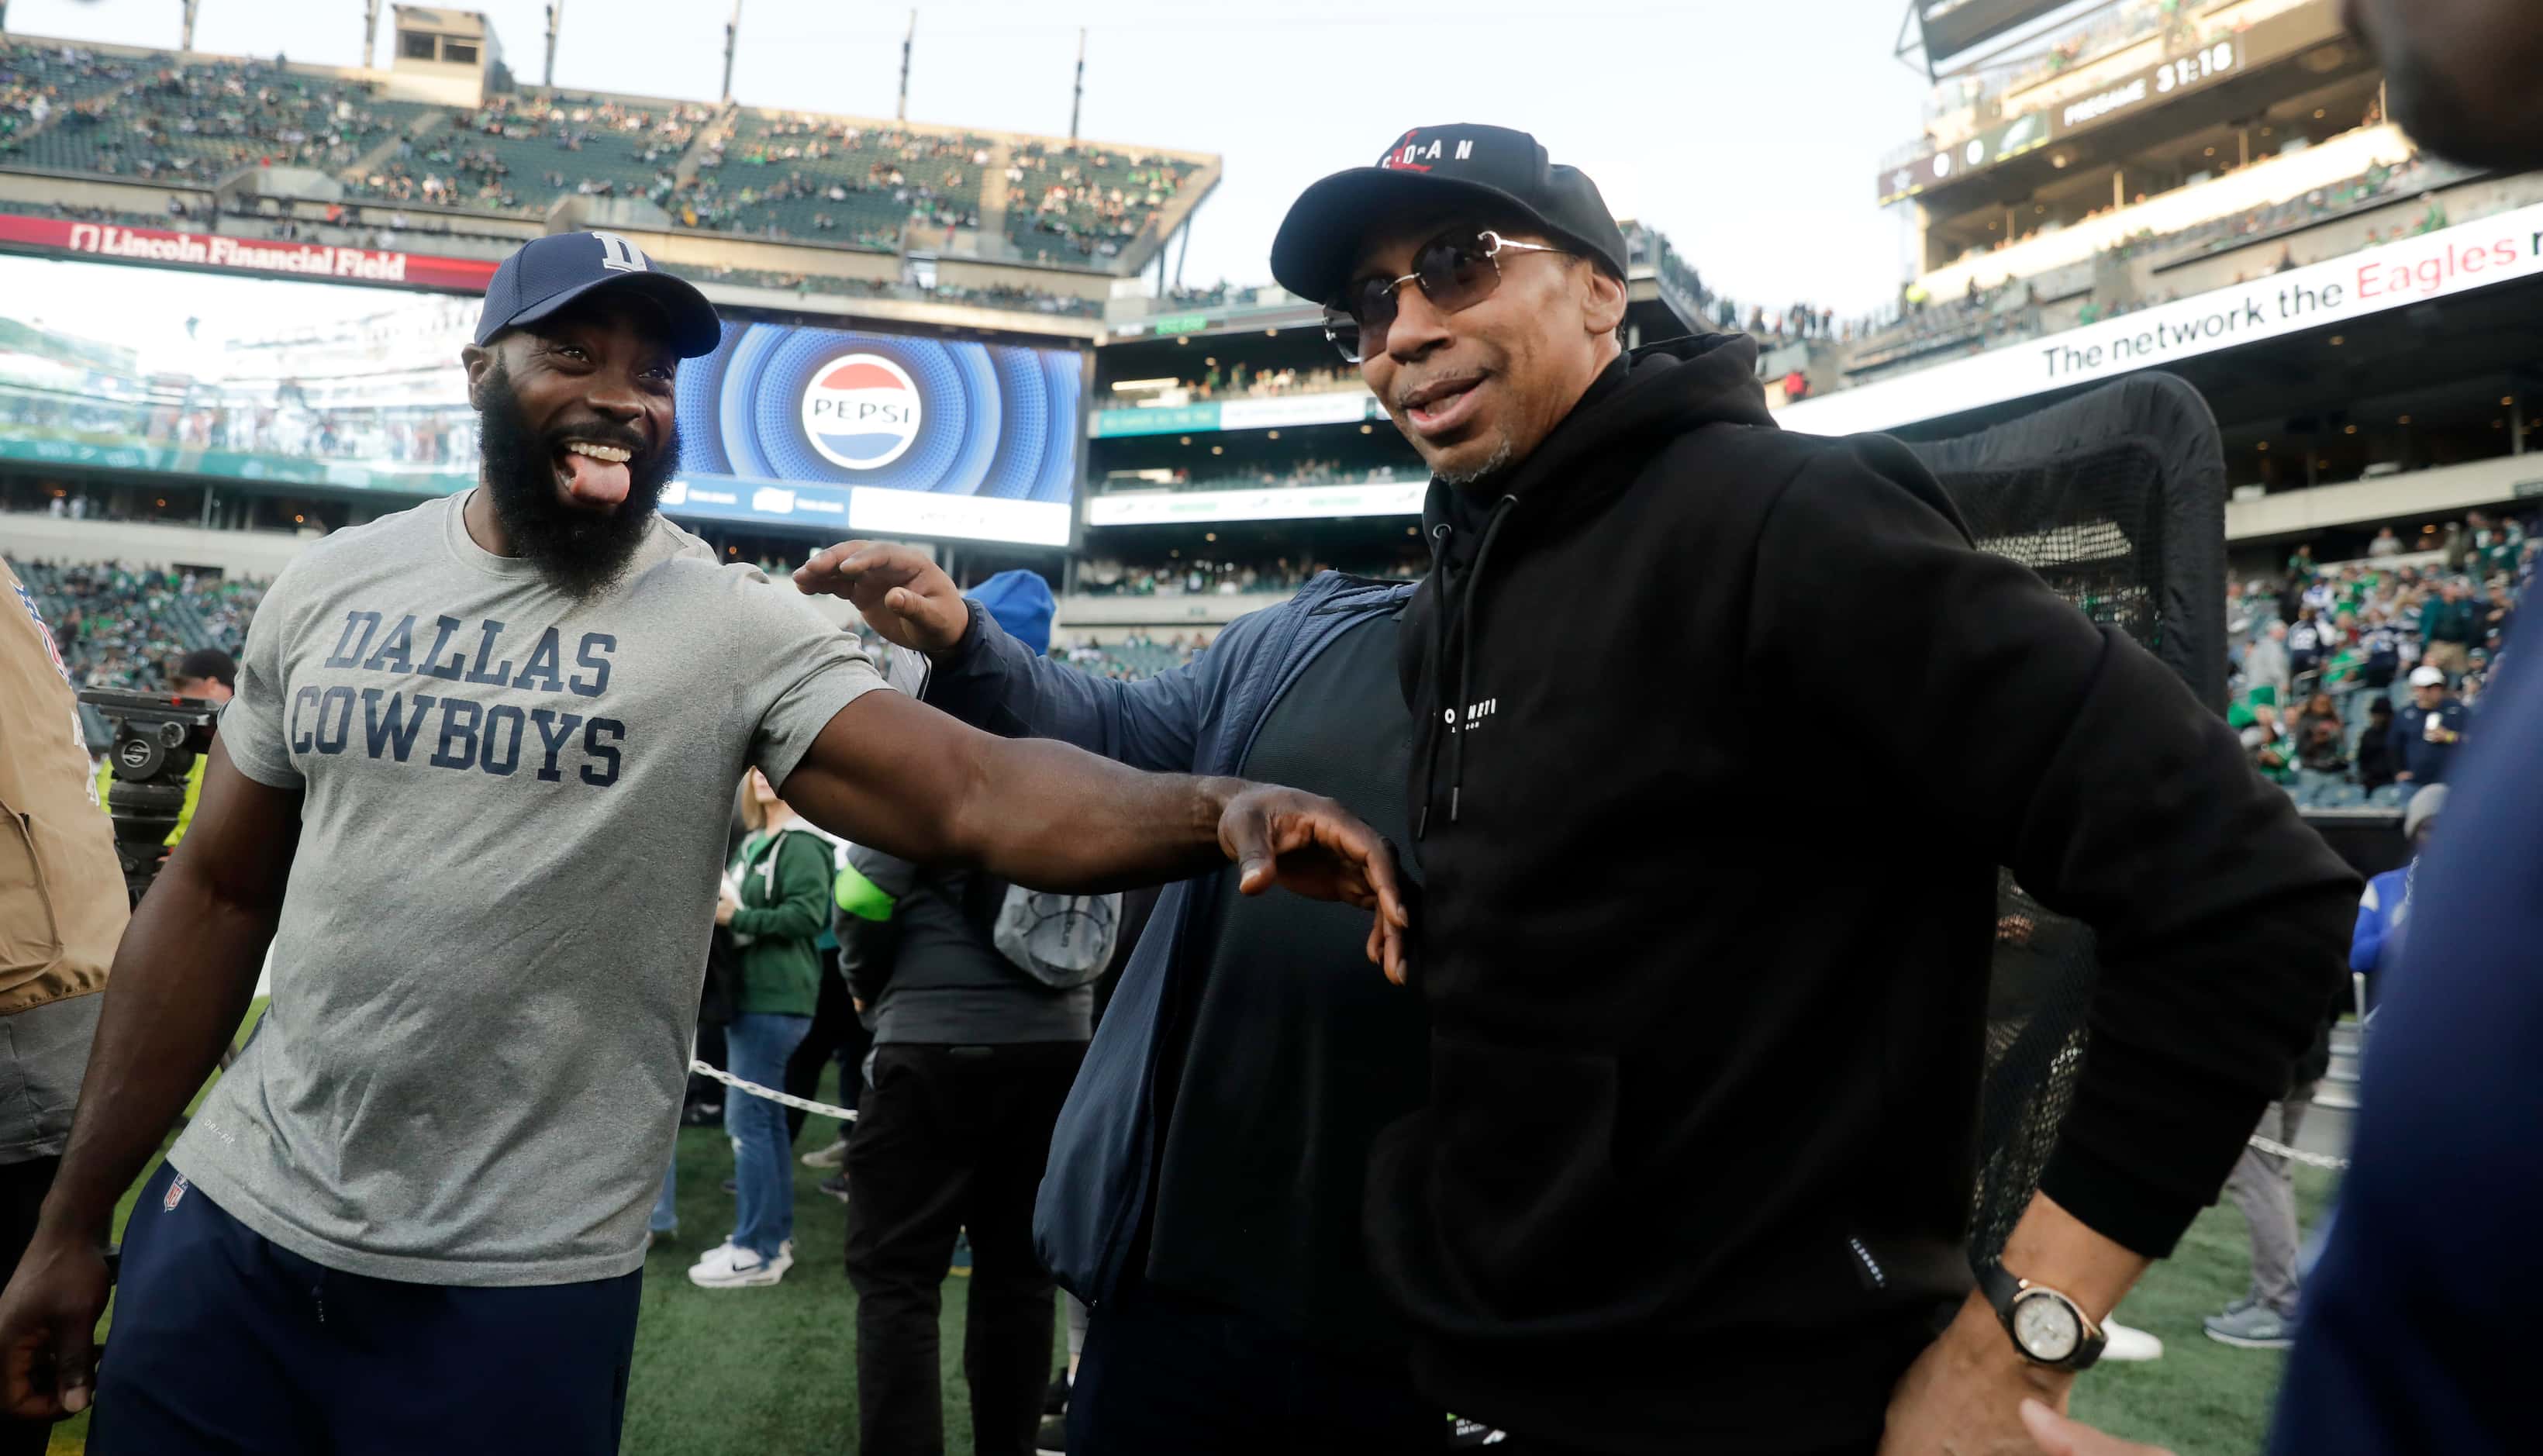 ESPN’s Stephen A. Smith was on the Dallas Cowboys sideline chatting with coaching staff...